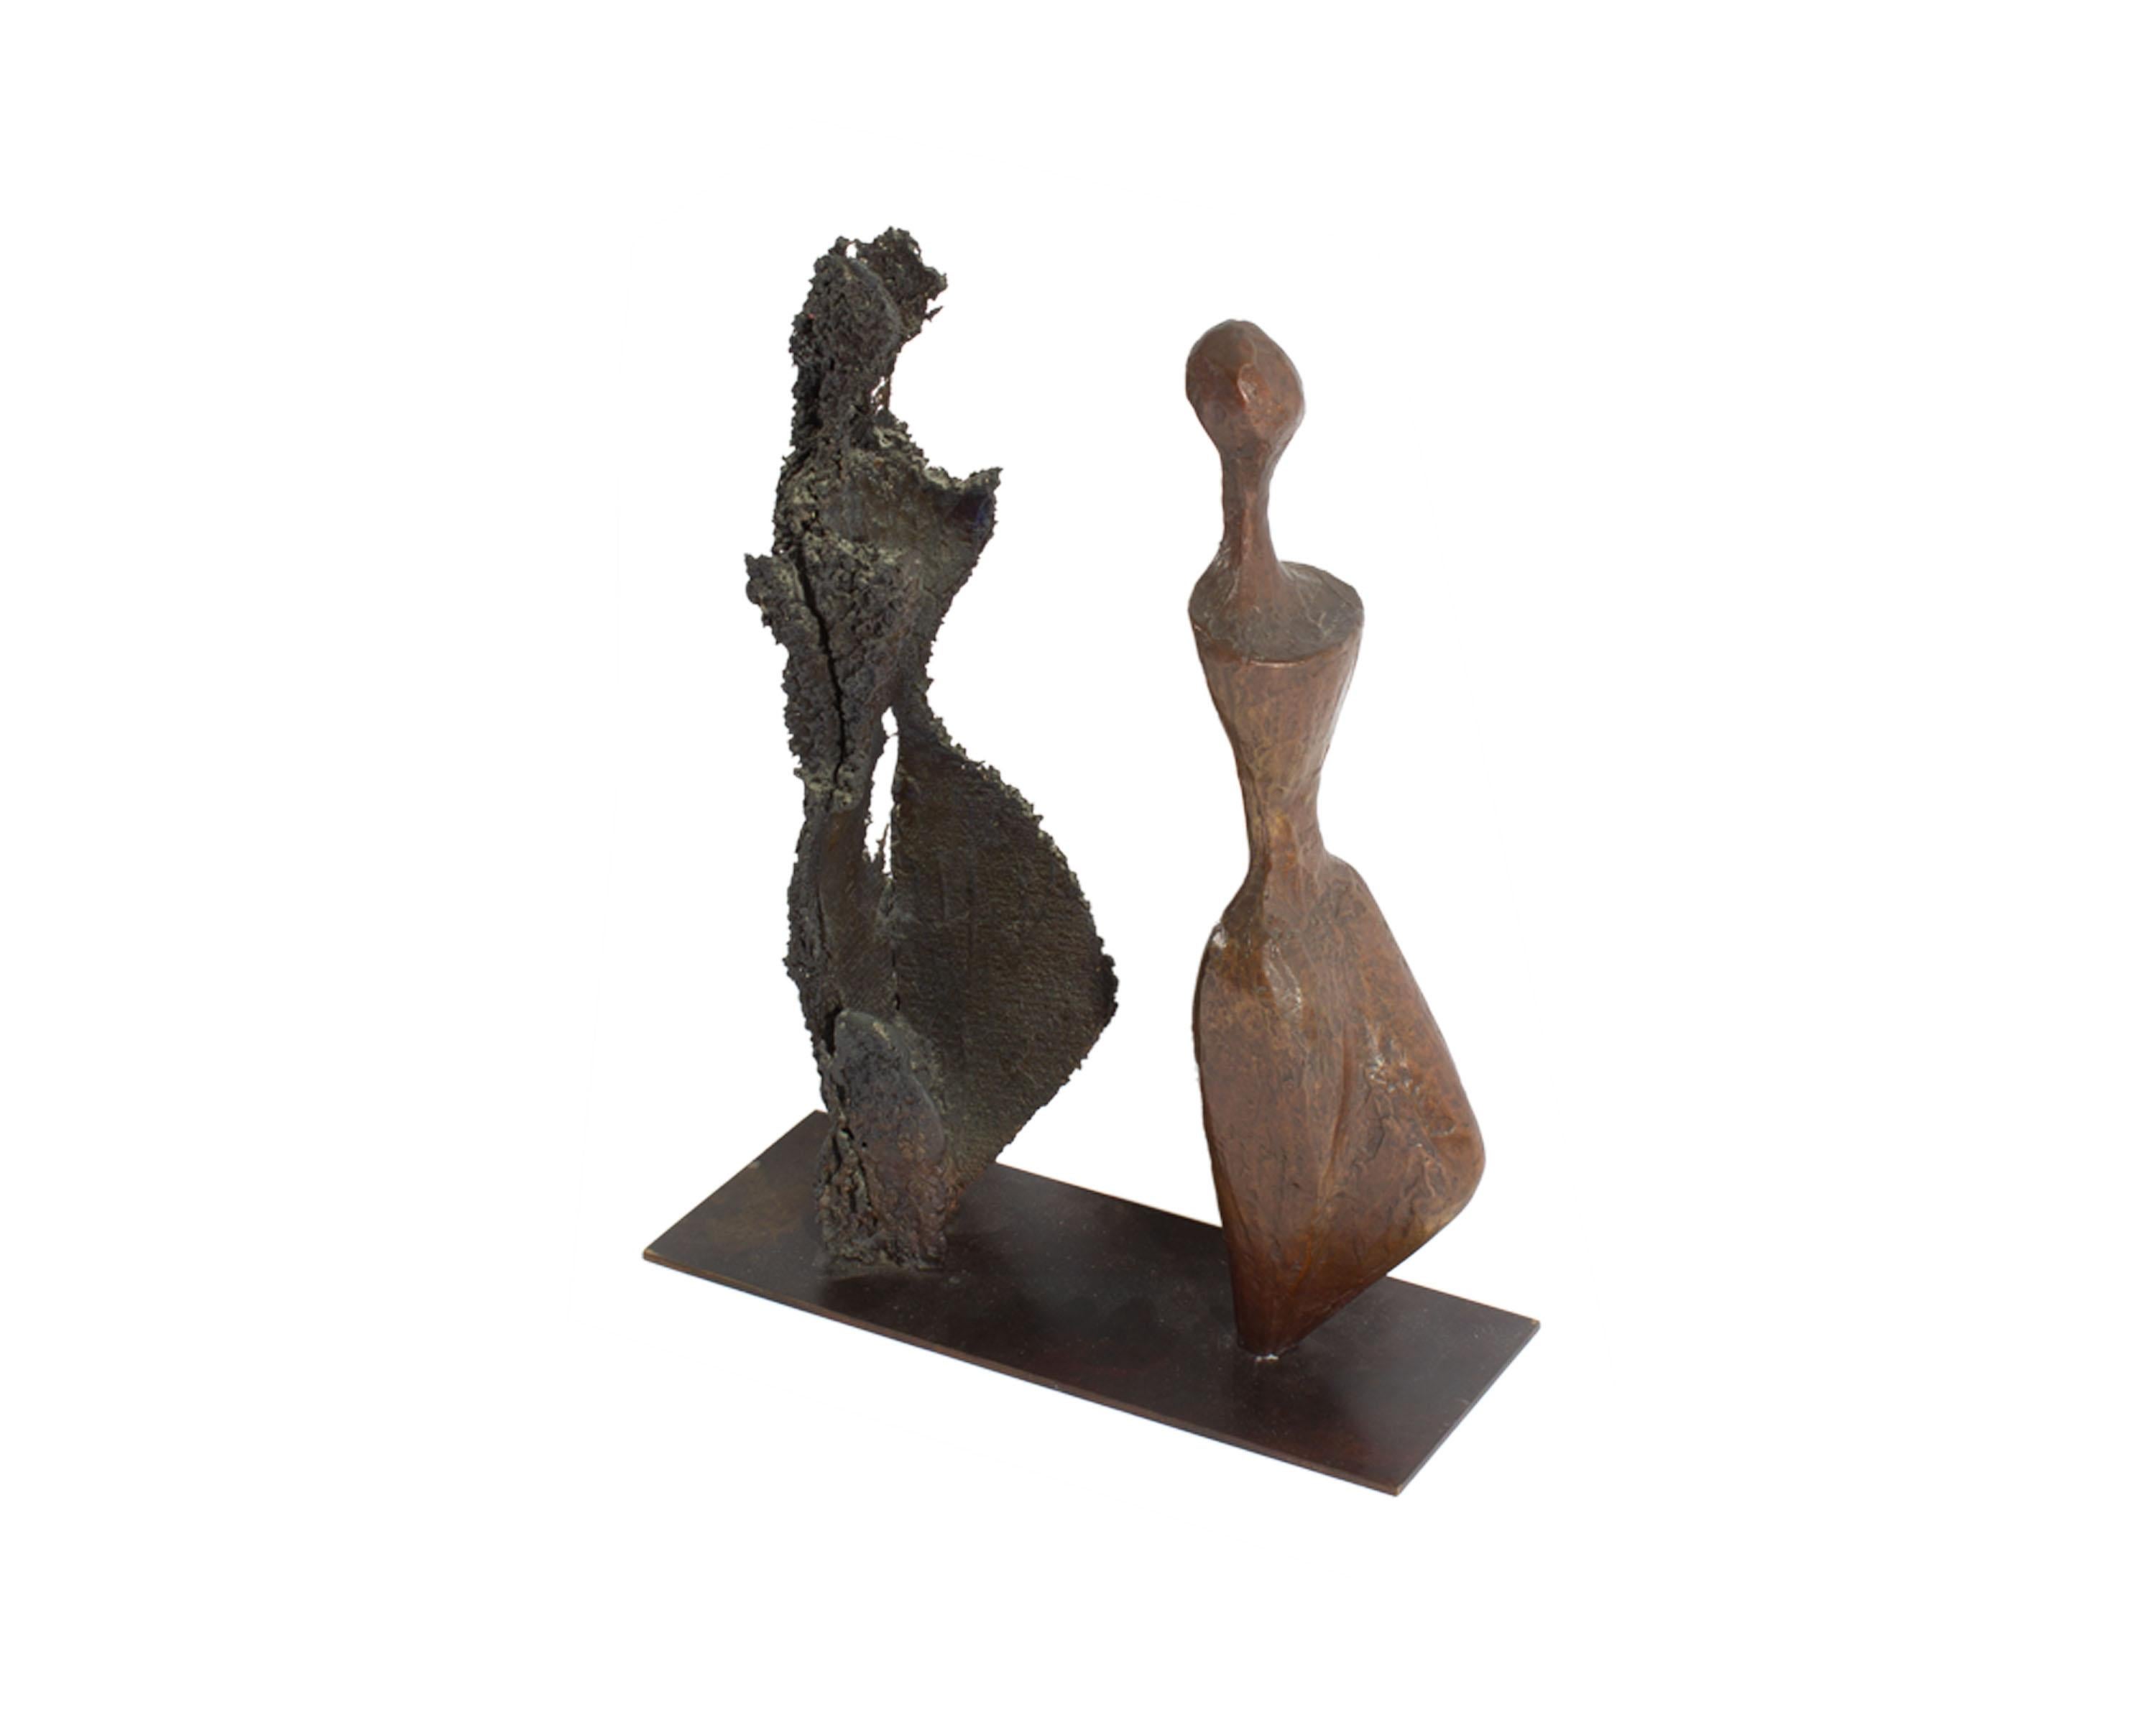 A limited edition bronze sculpture titled ﻿Emerging ﻿by the American artist Robert X. Holmes (born 1927). A bronze figure stands in front of a darker figure positioned identically with the latter figure appearing to be the shadow of the leading